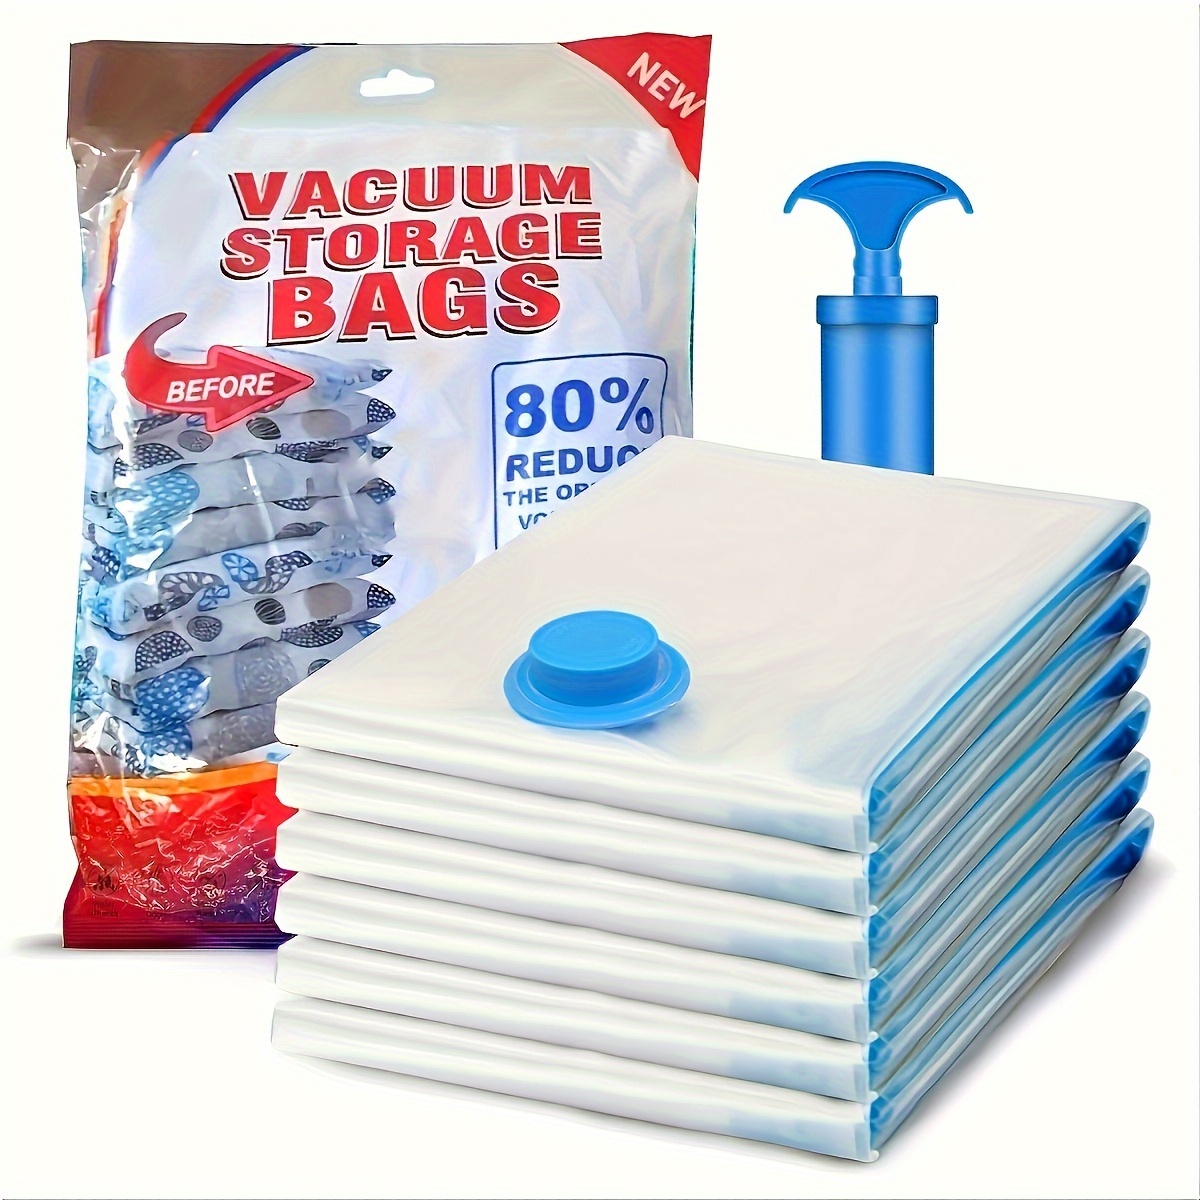 

4-pack Large Capacity Transparent Vacuum Storage Bags, Space Saver Bags For Clothing, Pillows, Beddings, Towels, Wardrobe Organization, Home And Travel Use